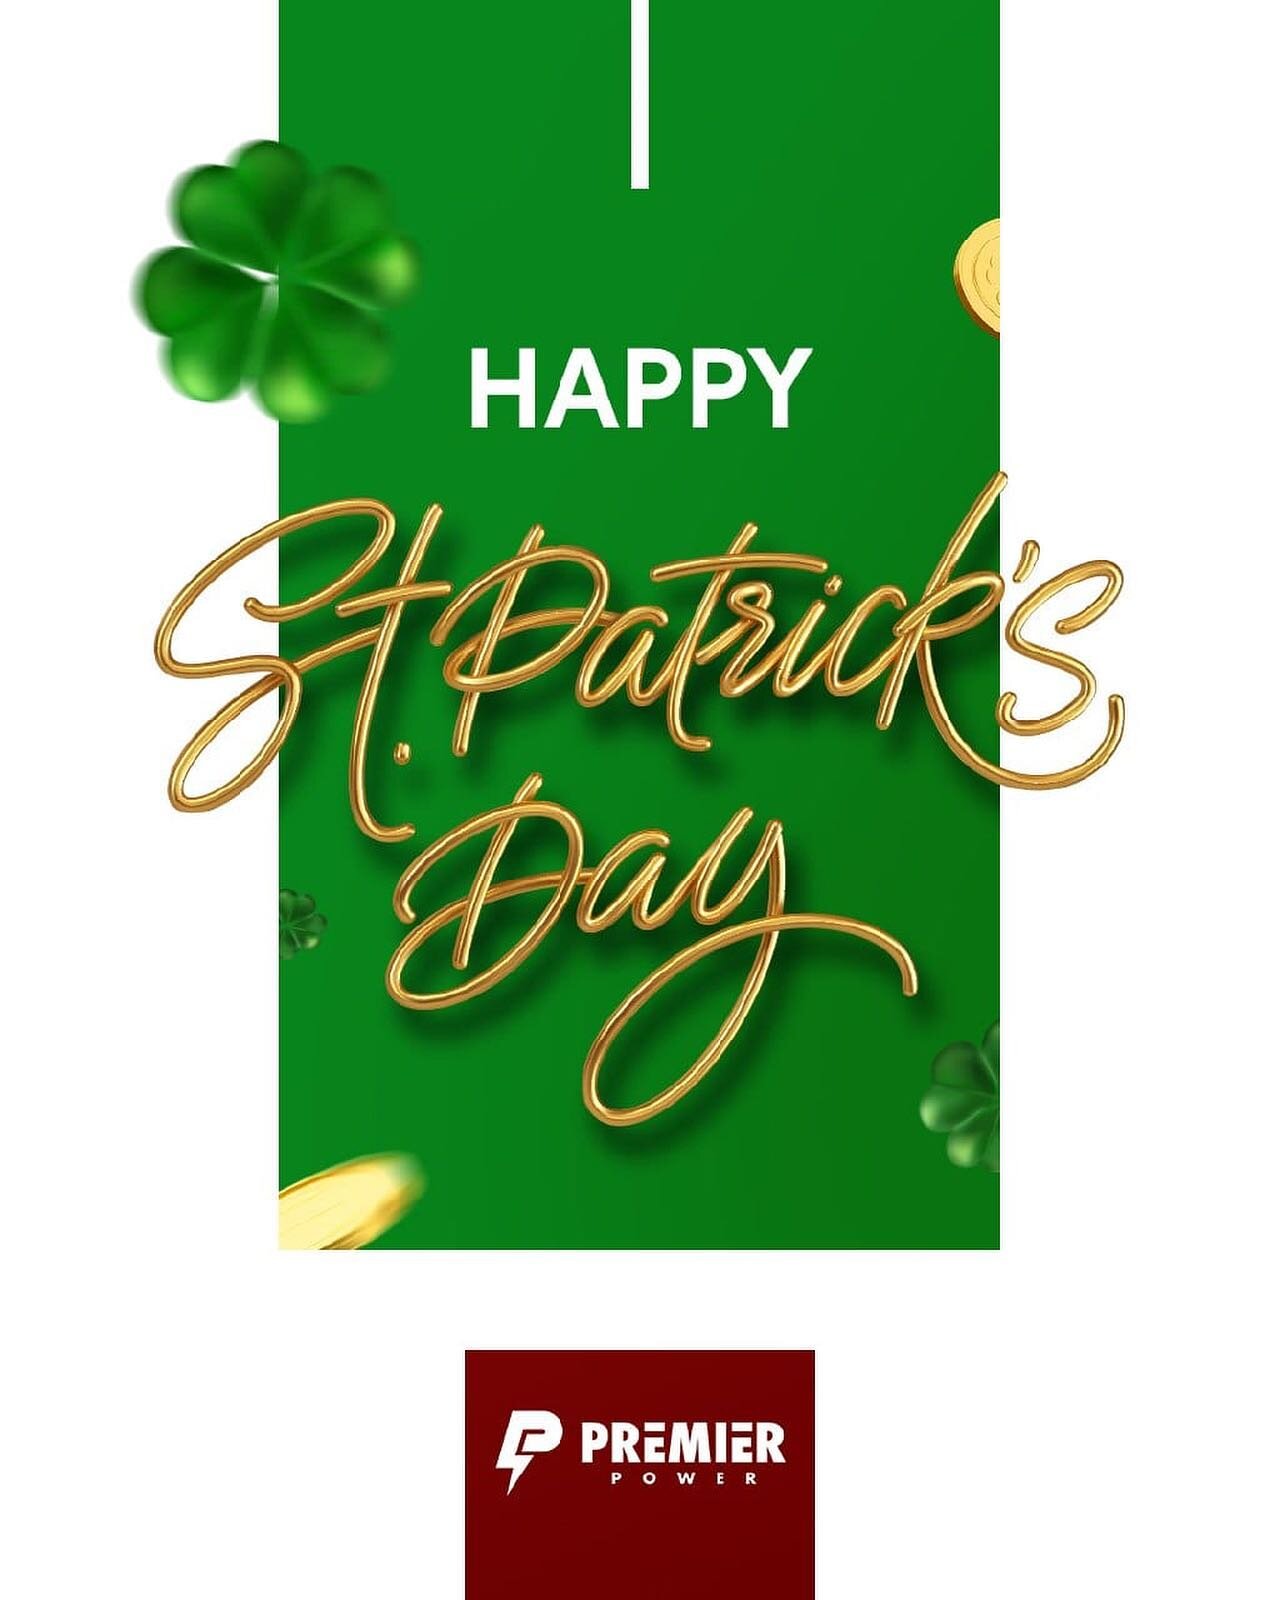 Happy St. Patrick&rsquo;s Day from our family to yours
.
.
.
#premierpower #electrician #electrical #stpatricksday #stpattysday #oc #orangecounty